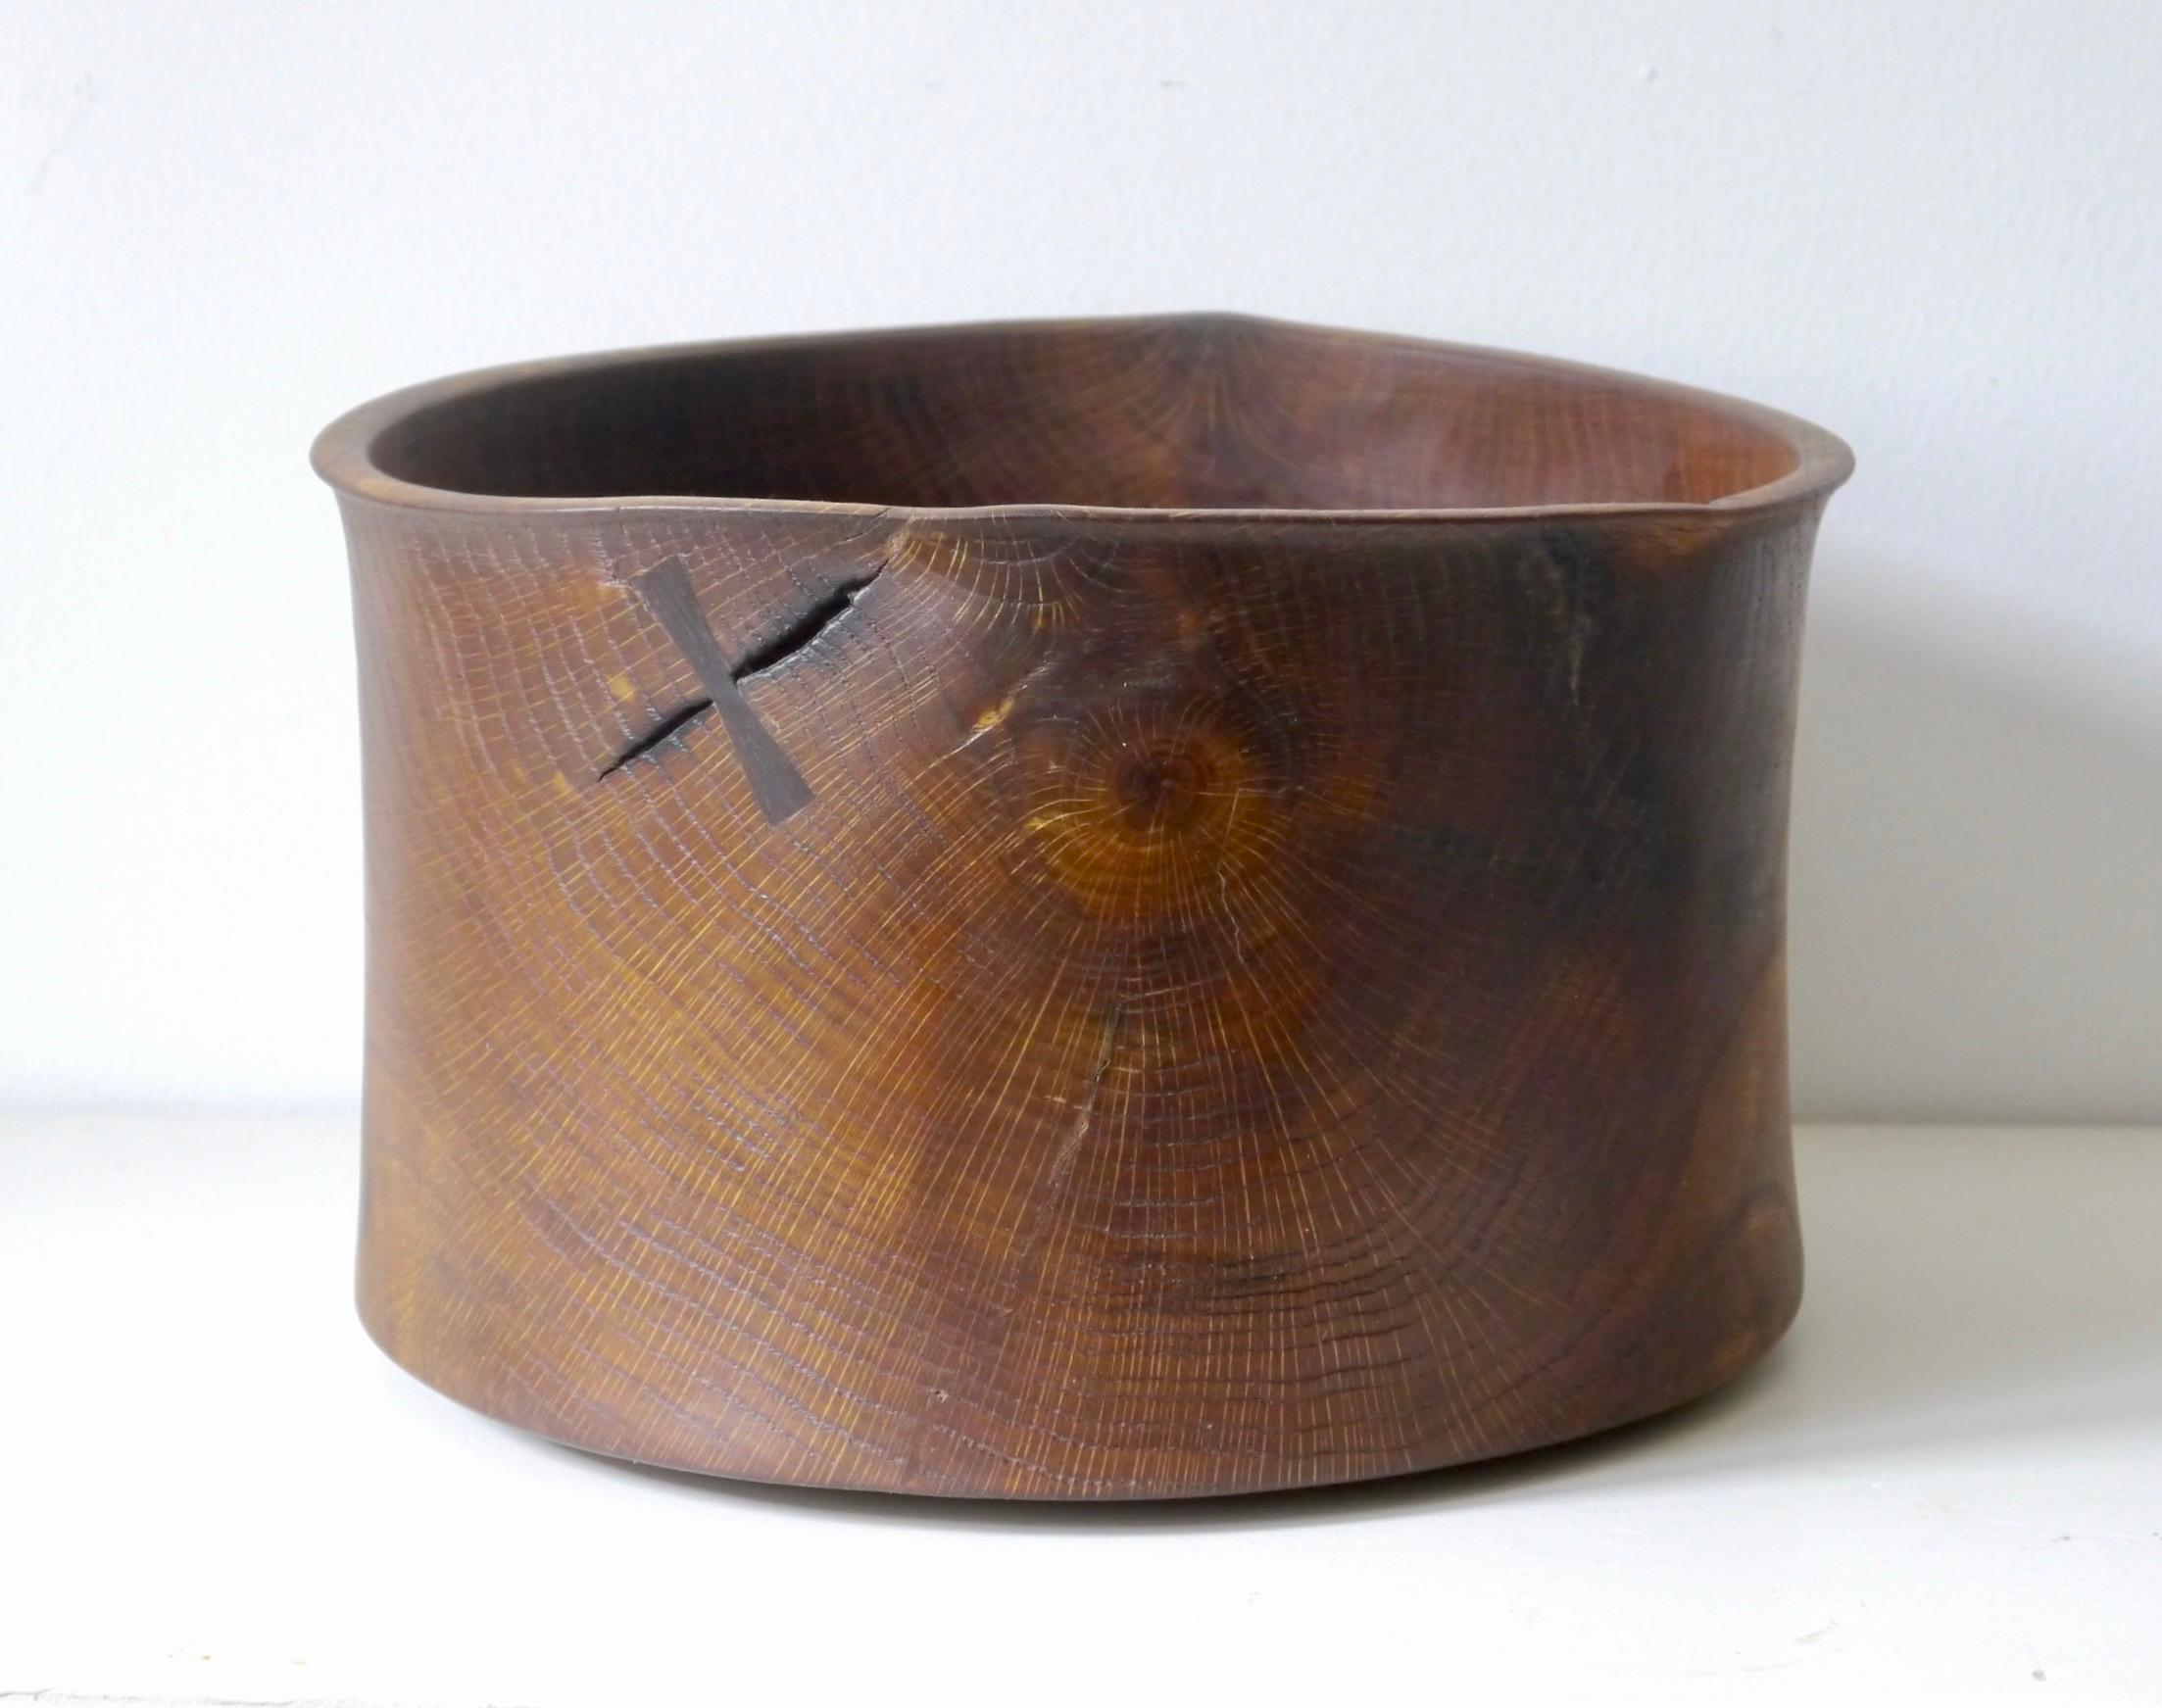 Limed and oiled oakbowl by Fritz Baumann
Dimensions: Ø 29 x H 17 cm
Materials: Oak

Hand made from solid pieces of wood, free-cut following the natural grain, made one by one, the stools of Fritz Baumann are the kind of objects that remind us of